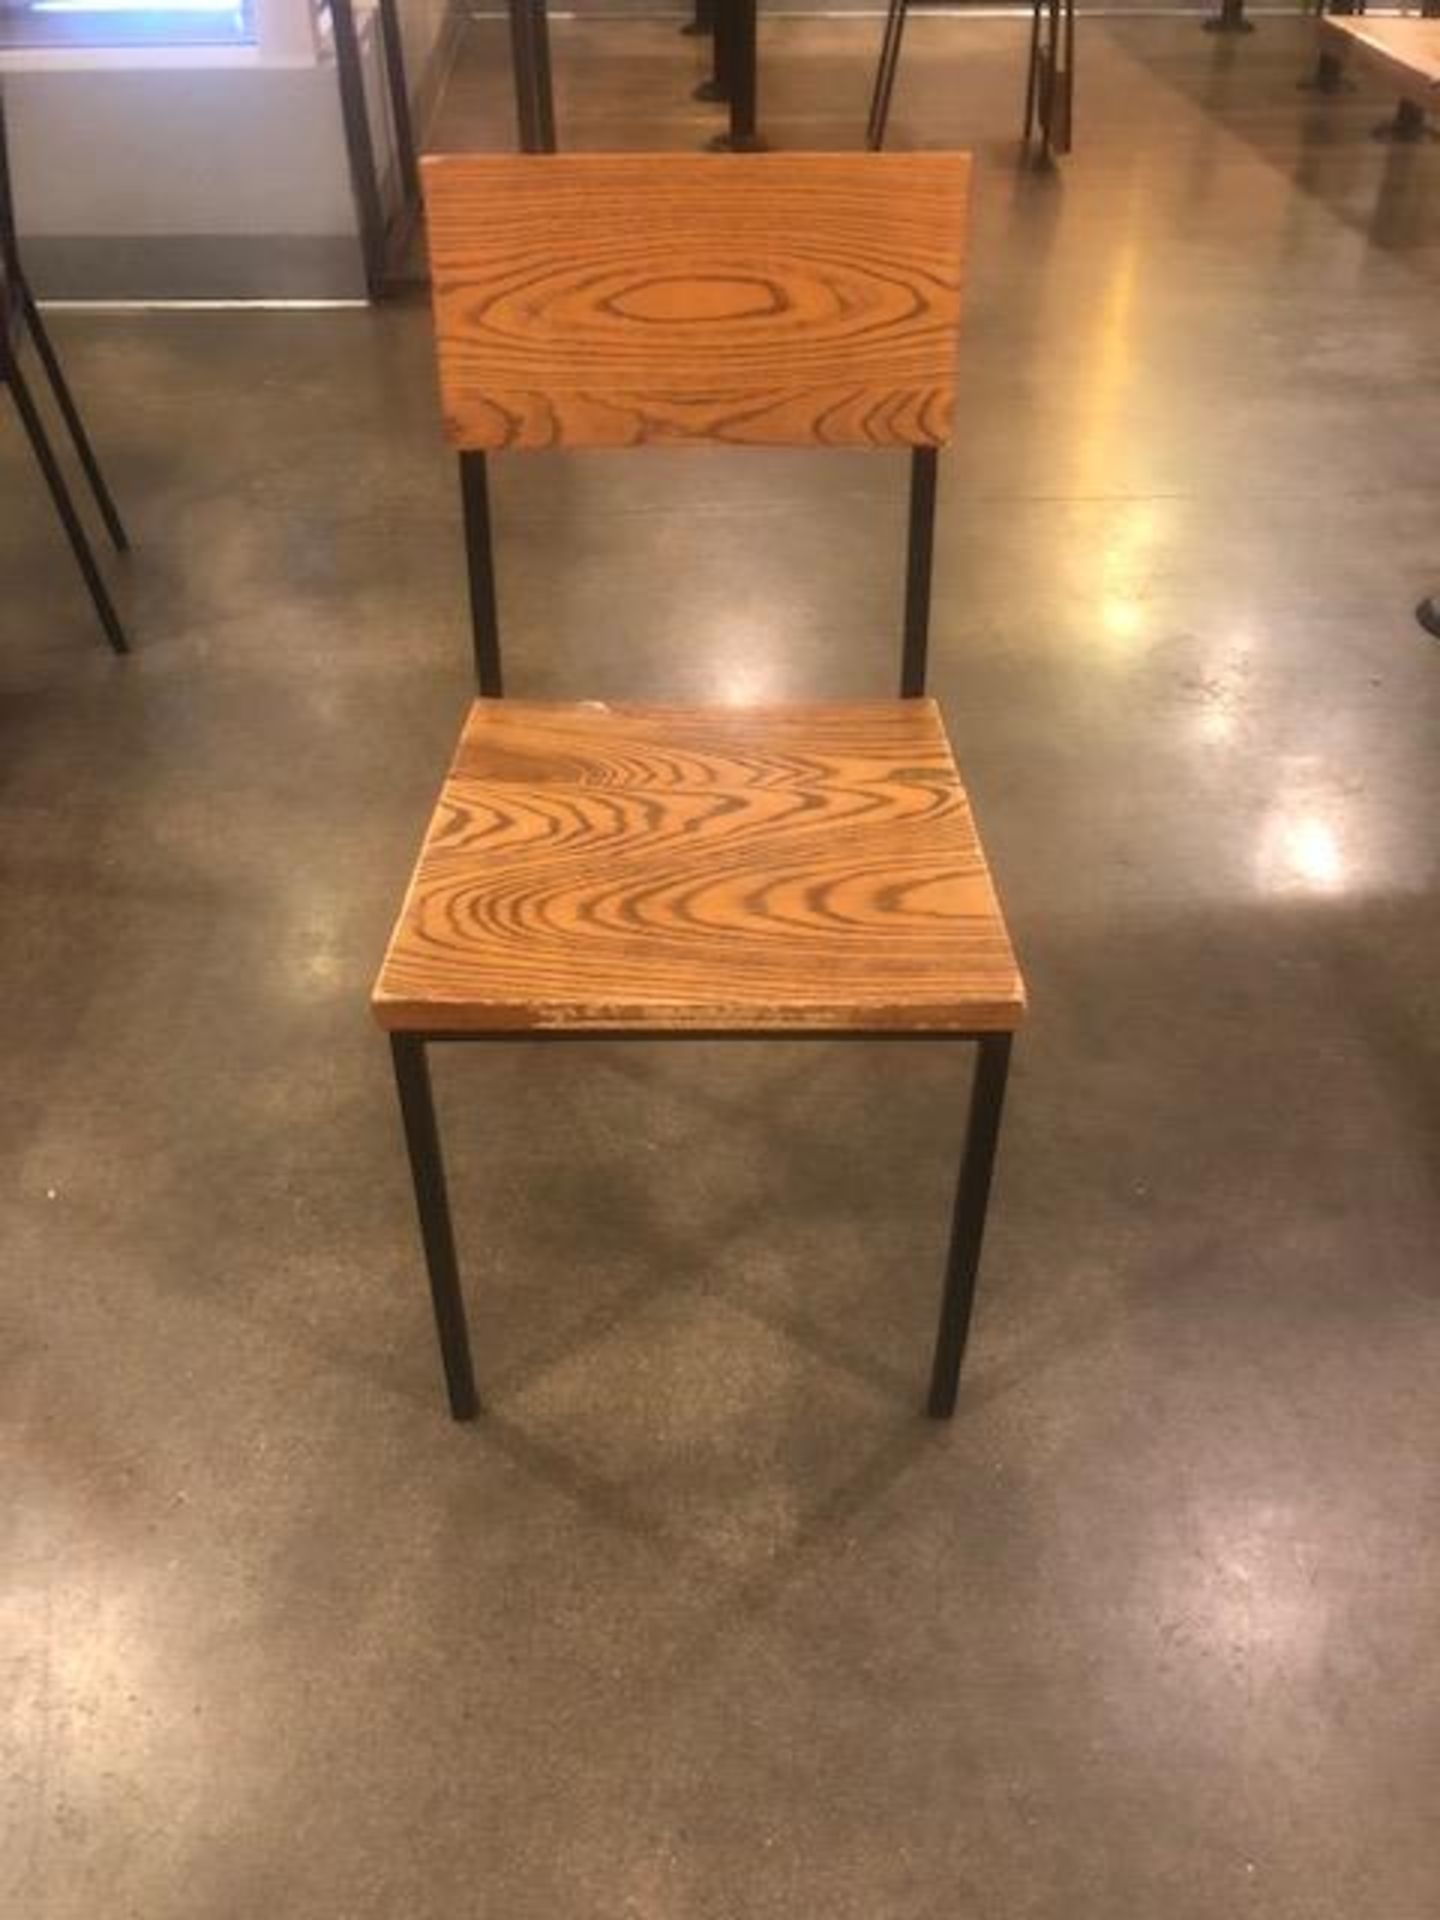 DINING ROOM CHAIRS ALL WOOD AND METAL FRAME BY DESIGN FORM - Image 3 of 4